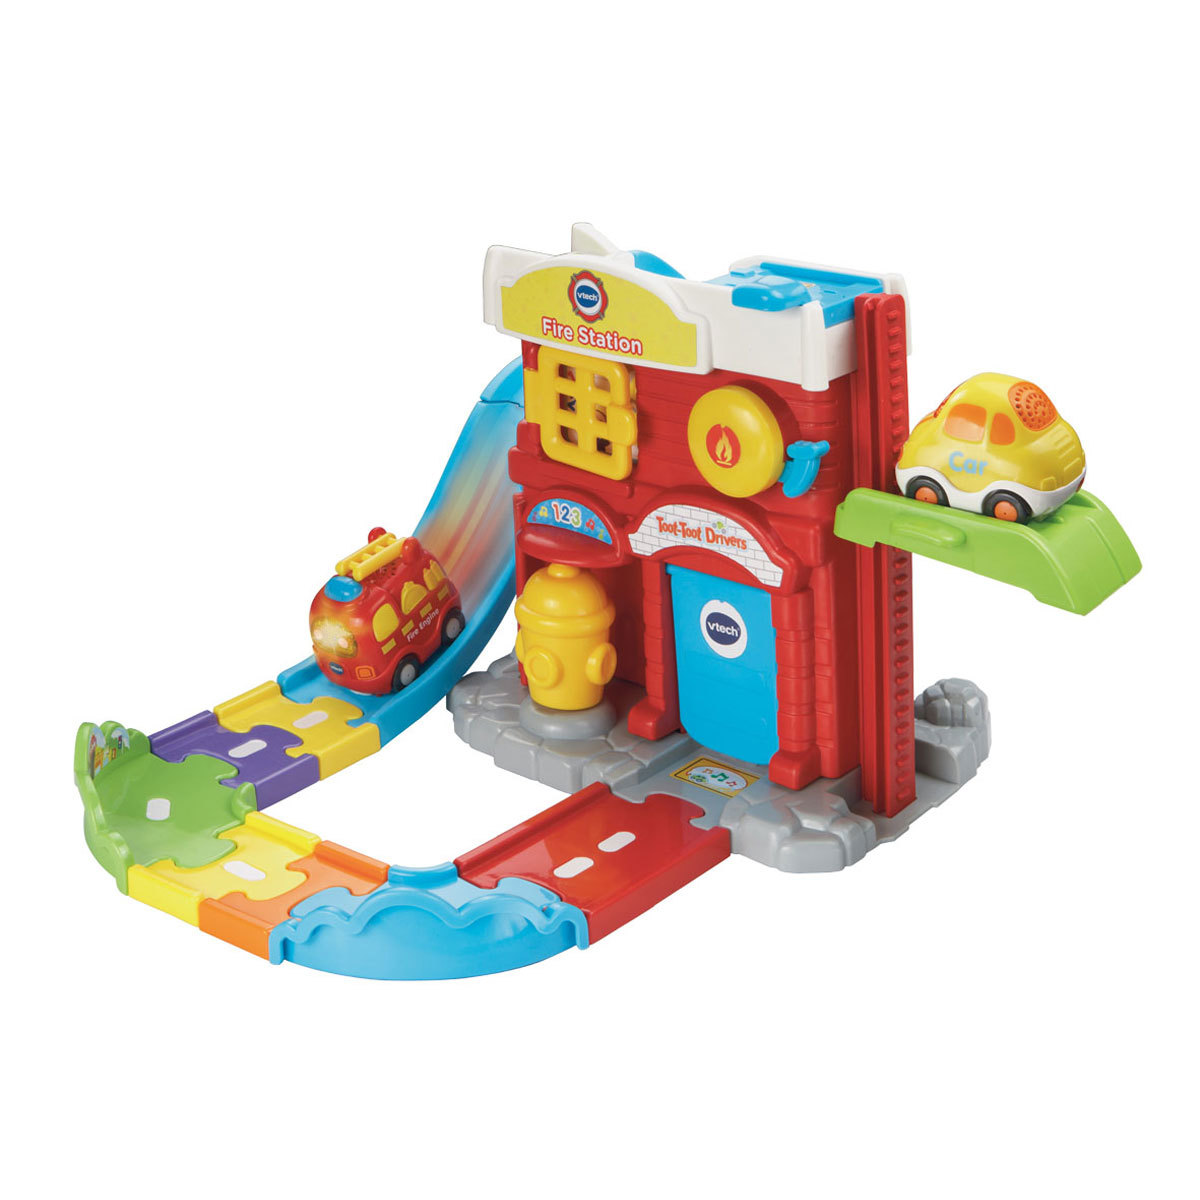 Toot Toot Drivers BNIB VTech Baby Includes 2 Engines Fire Station Deluxe 